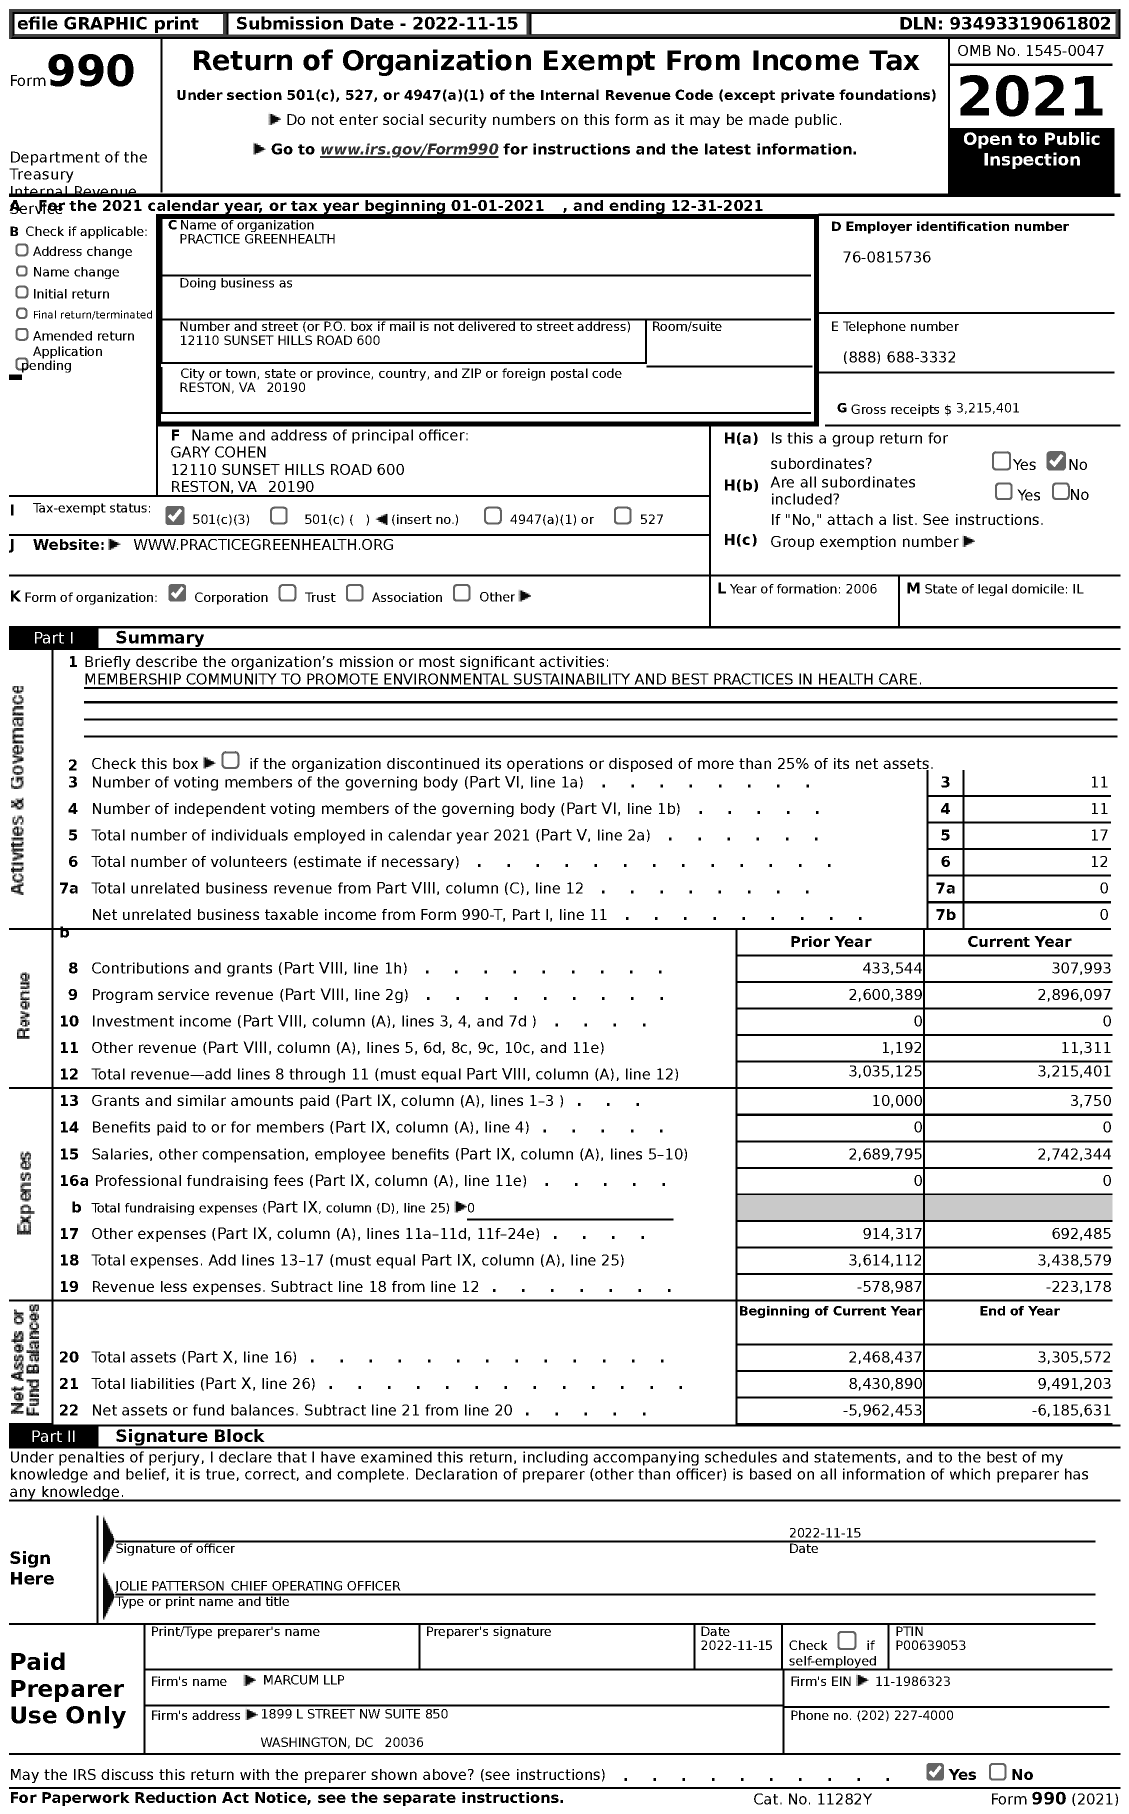 Image of first page of 2021 Form 990 for Practice Greenhealth